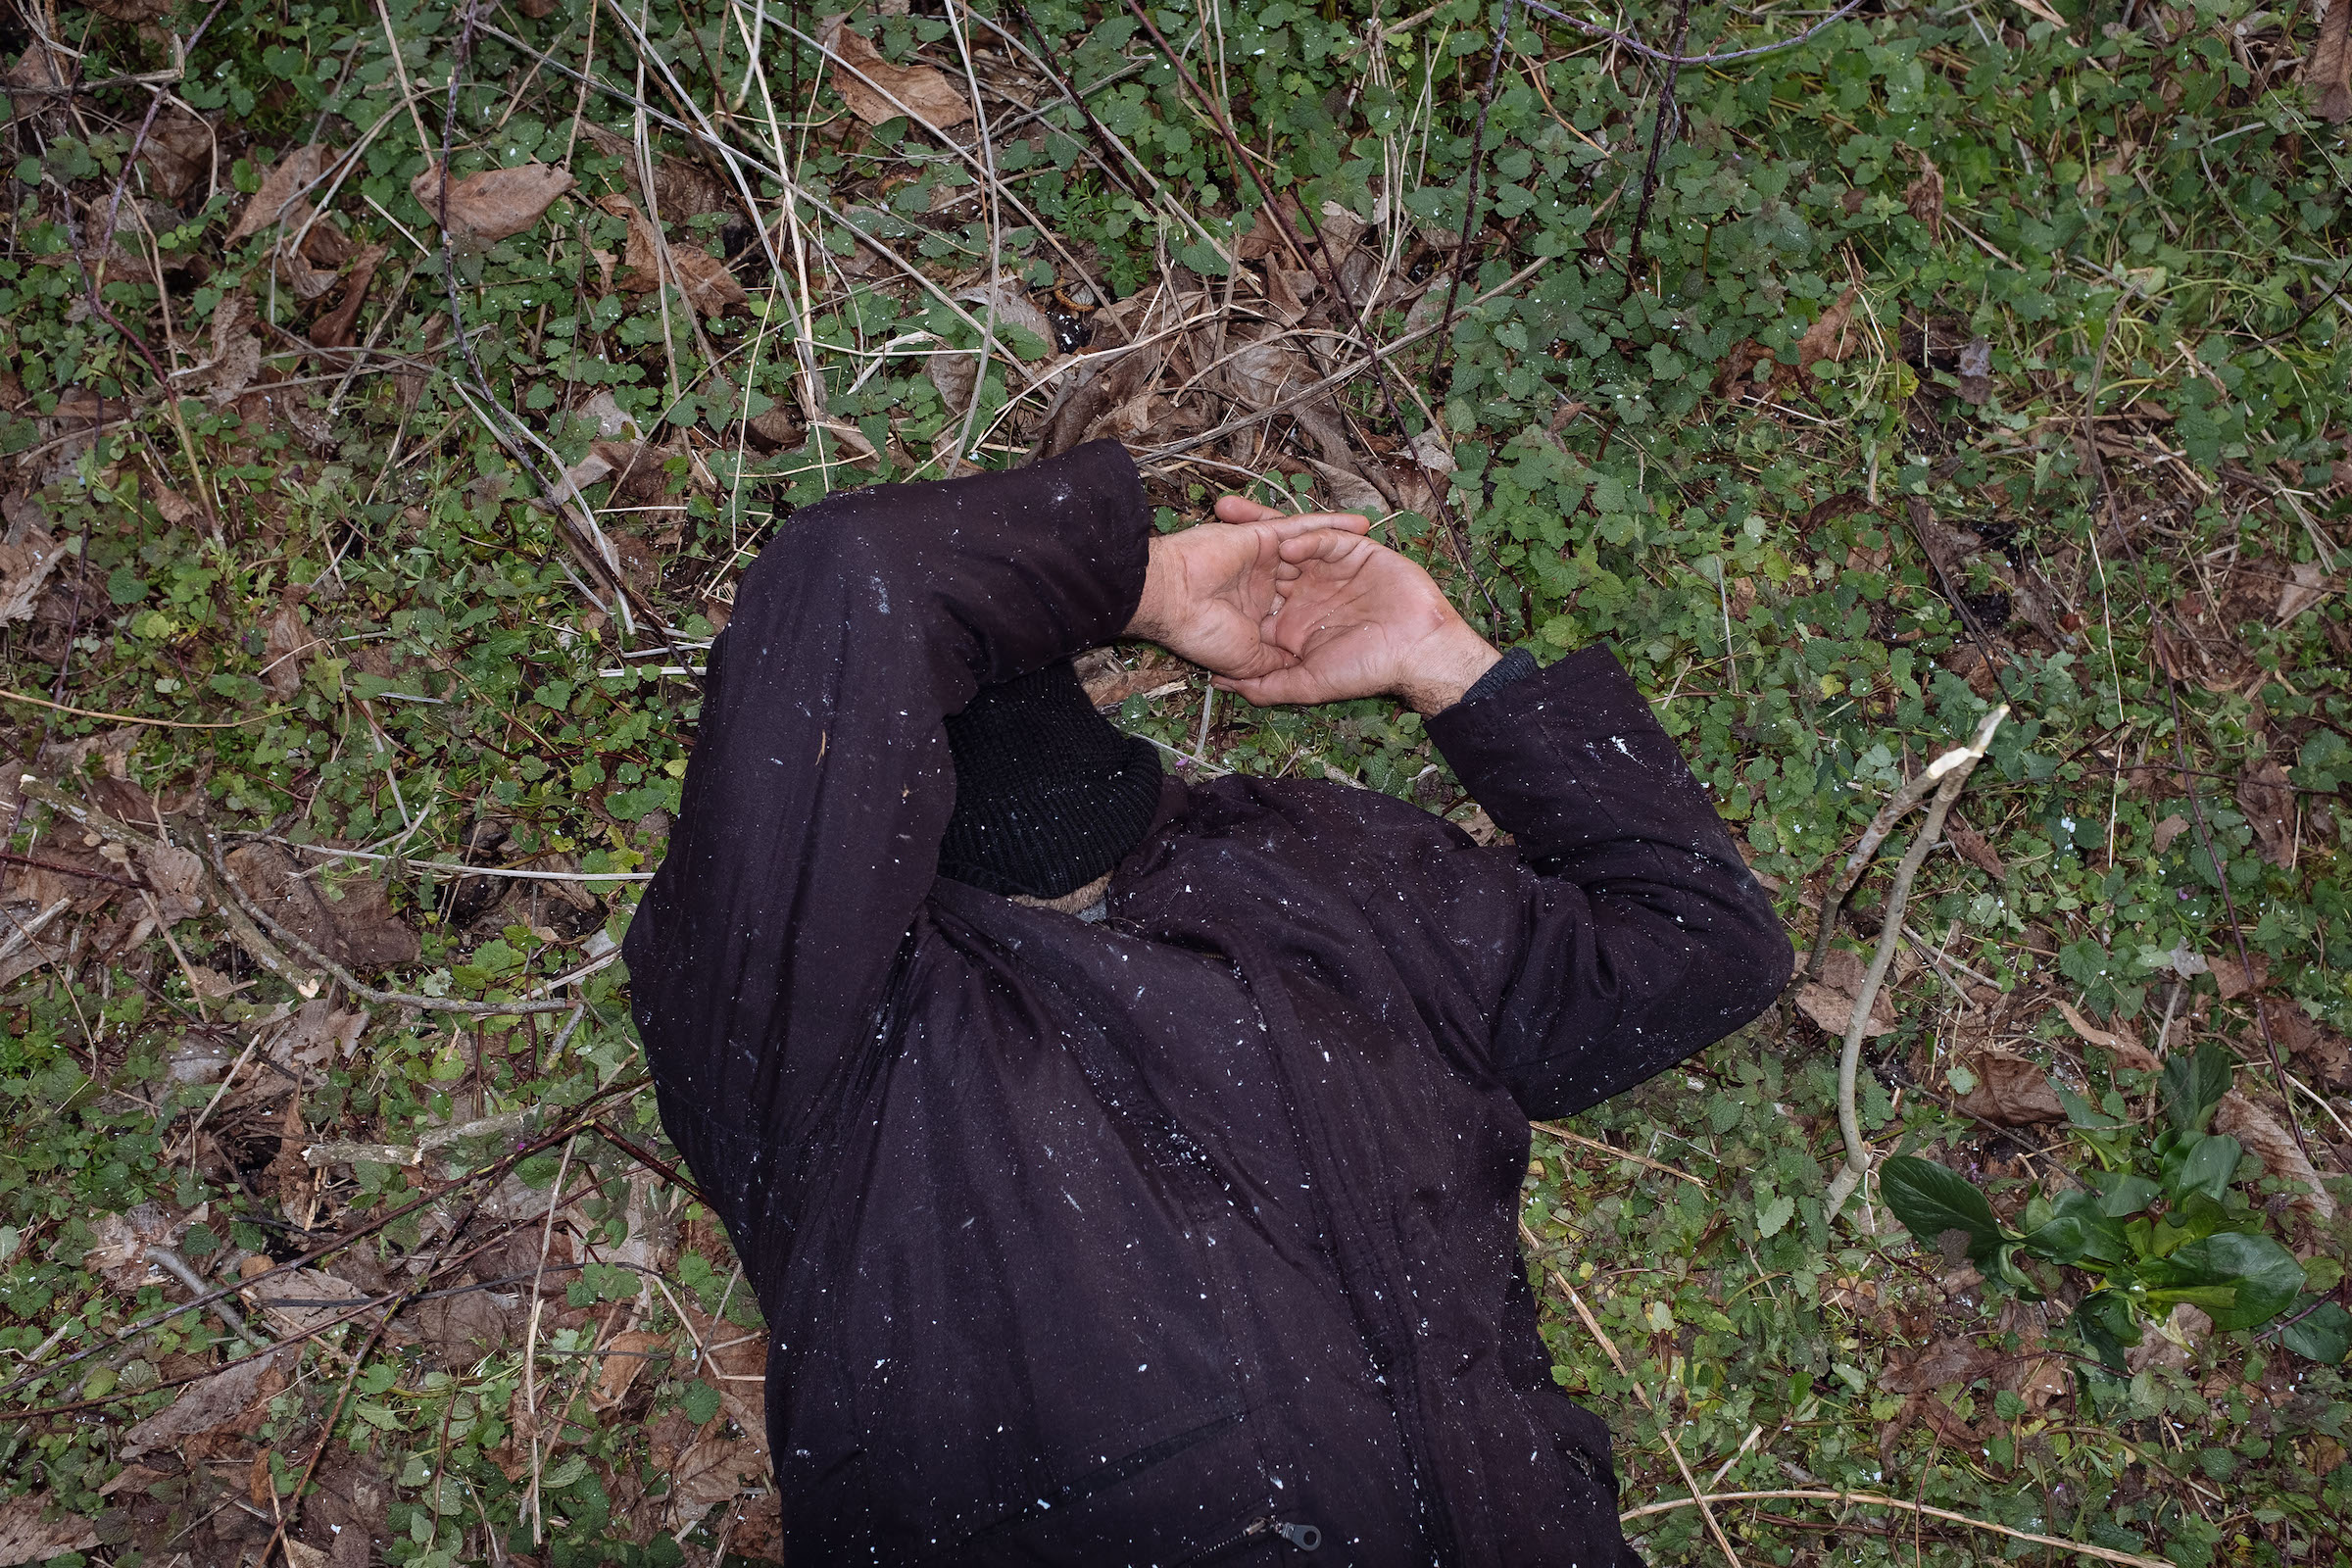 A man sleeps on the ground in the buffer zone.